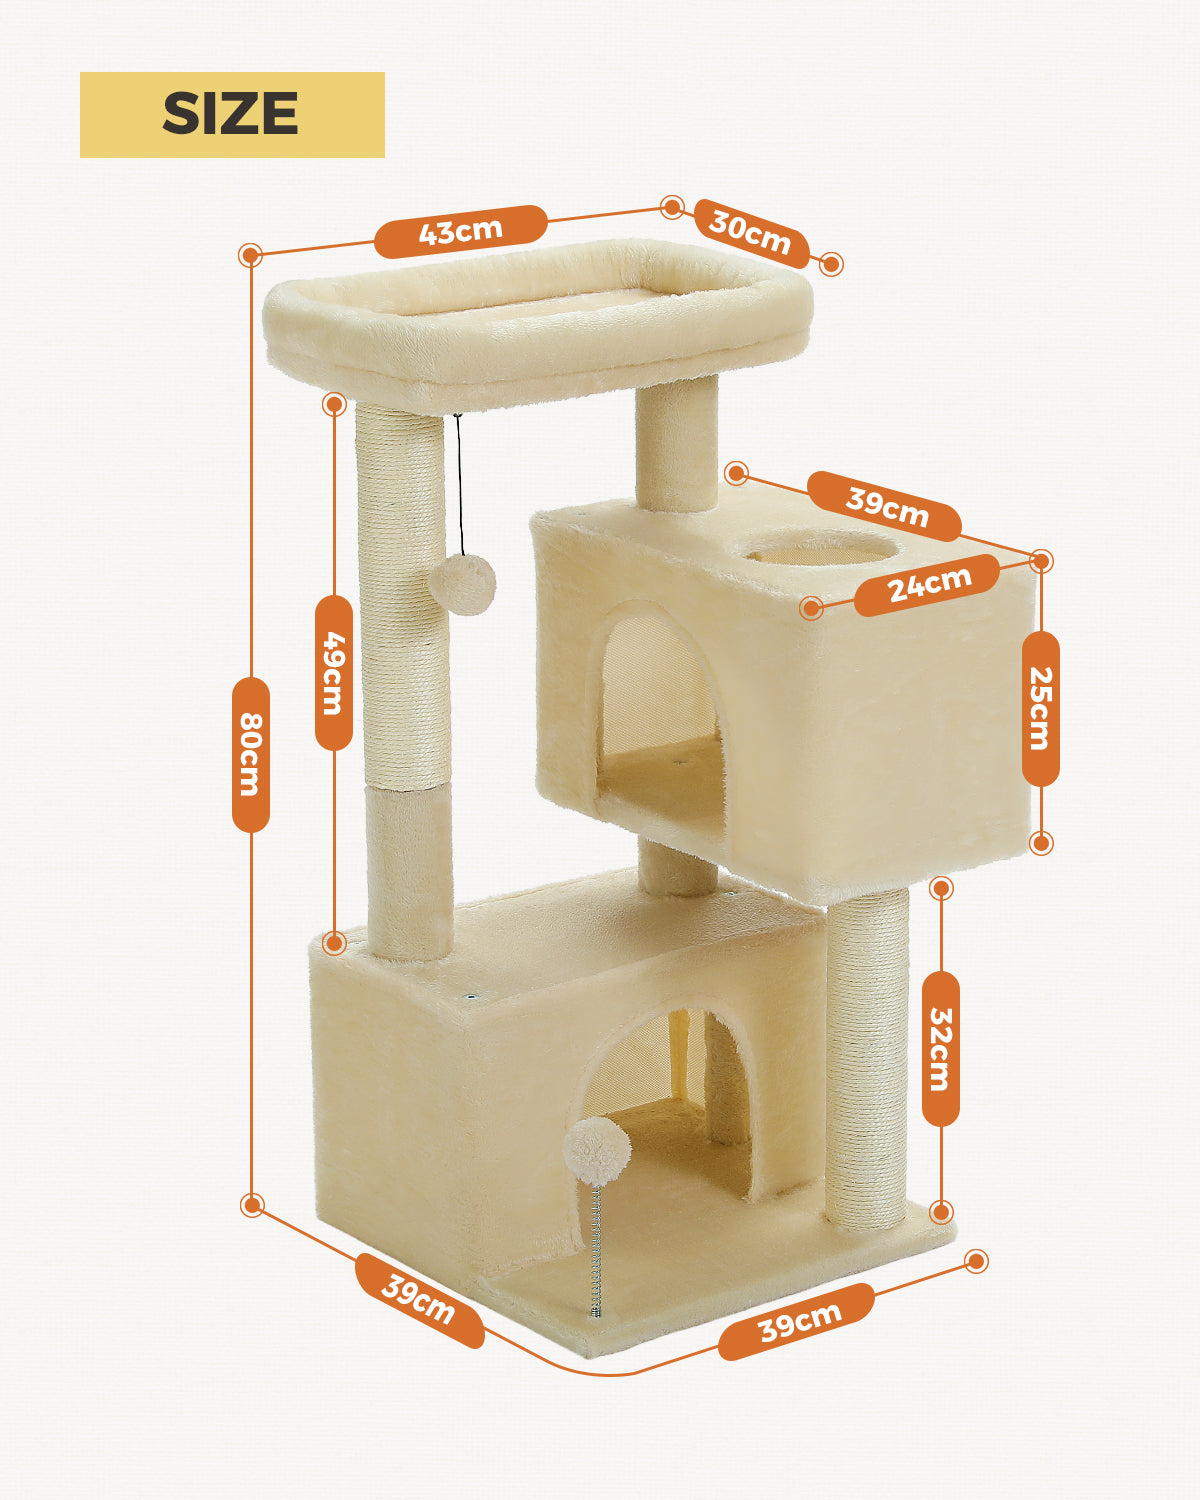 PAWZ Road Cat Tree Tower Scratching Post Scratcher with Large Condo House Beds Beige